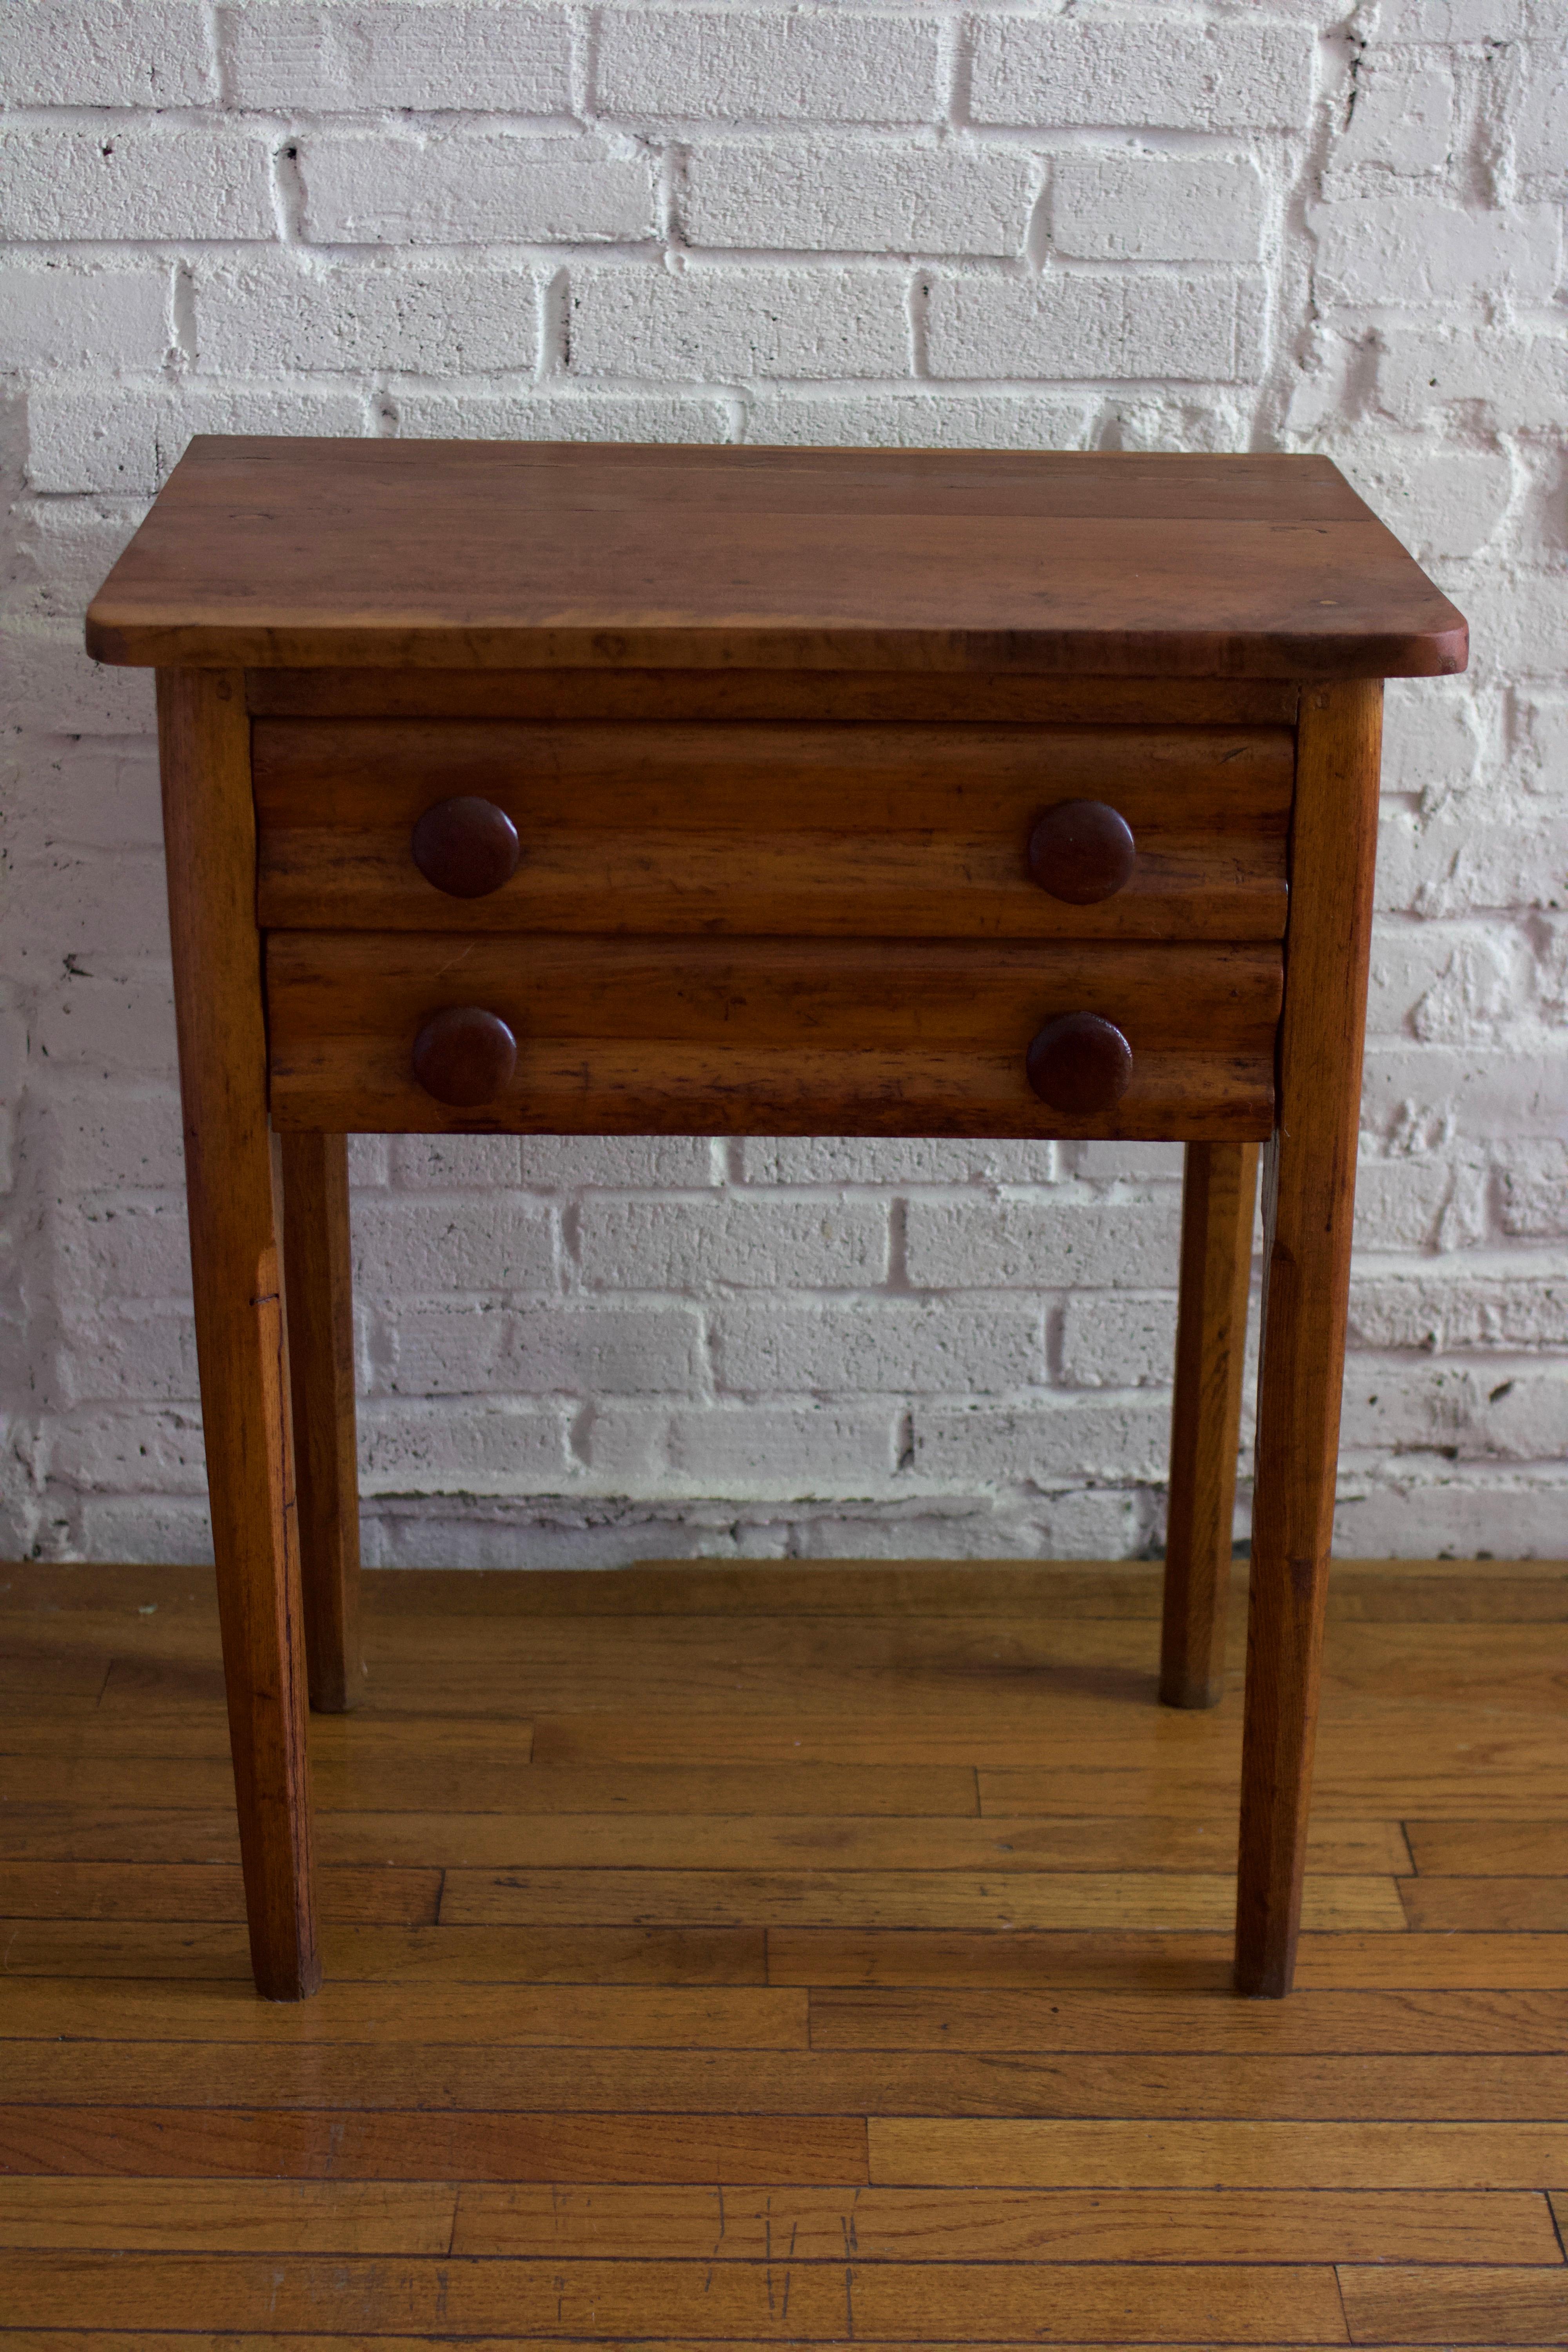 Unique mid to late 19th century stand / end table. This primitive meets Americana style table features two drawers with a bow-front roll design, solid-wood knobs and tapered legs. The dovetail drawers are in solid condition. The rectangle top